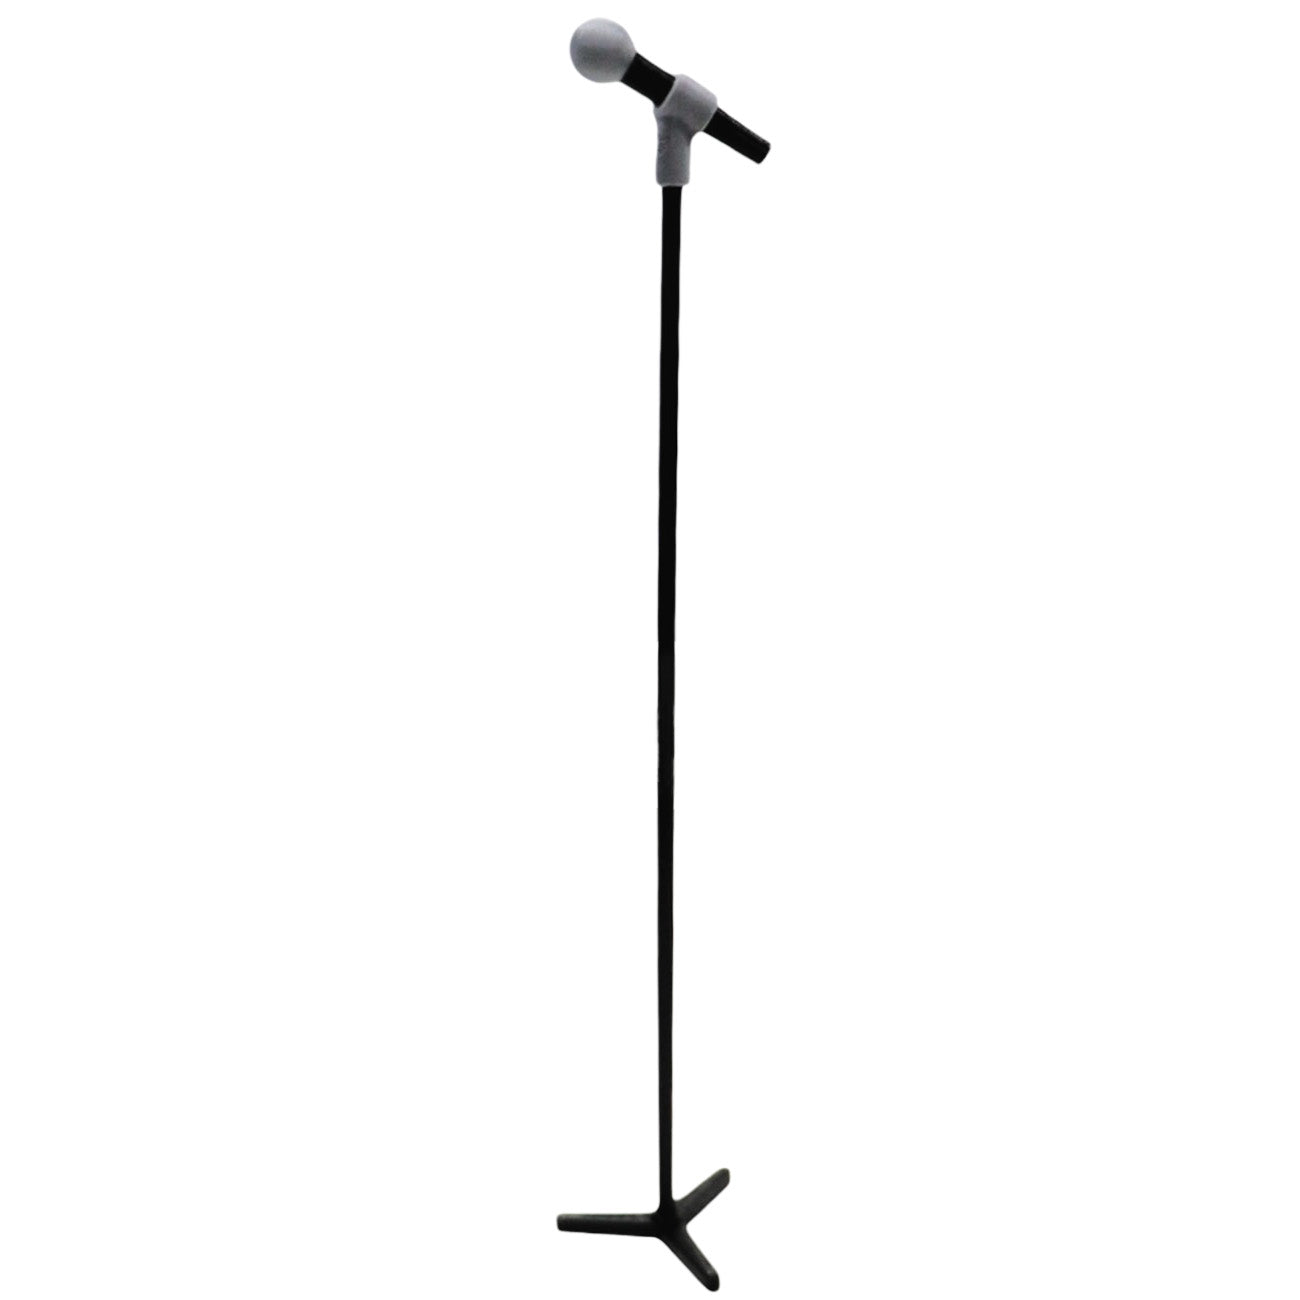 Elf microphone prop with stand